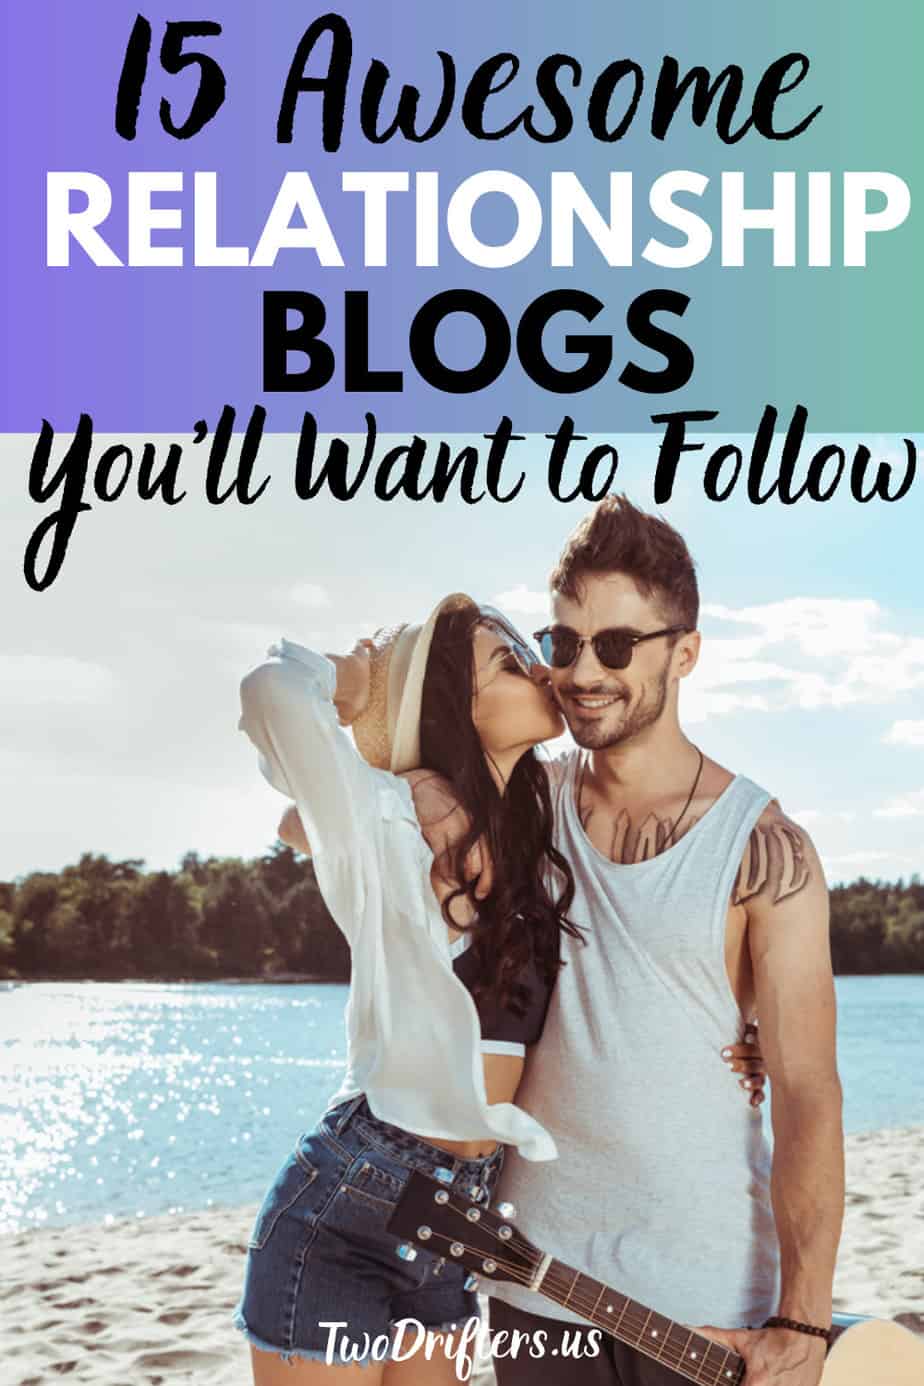 Pinterest social share image that says "15 Awesome Relationship Blogs You'll Want to Follow."